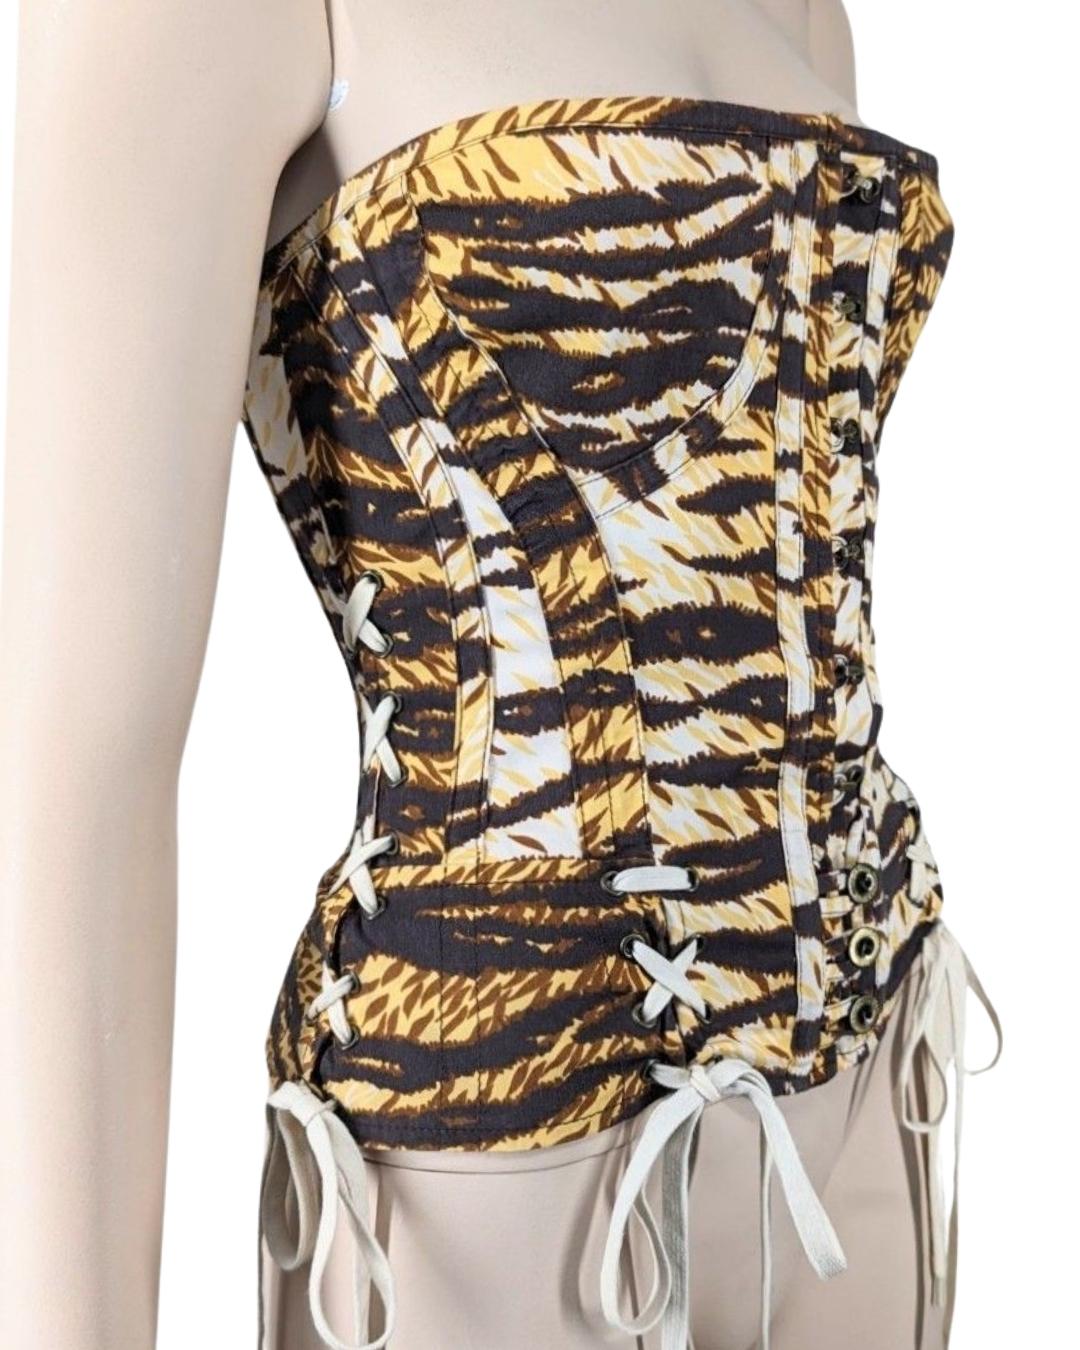 D&G by Dolce & Gabbana Animal Print Bustier For Sale 3